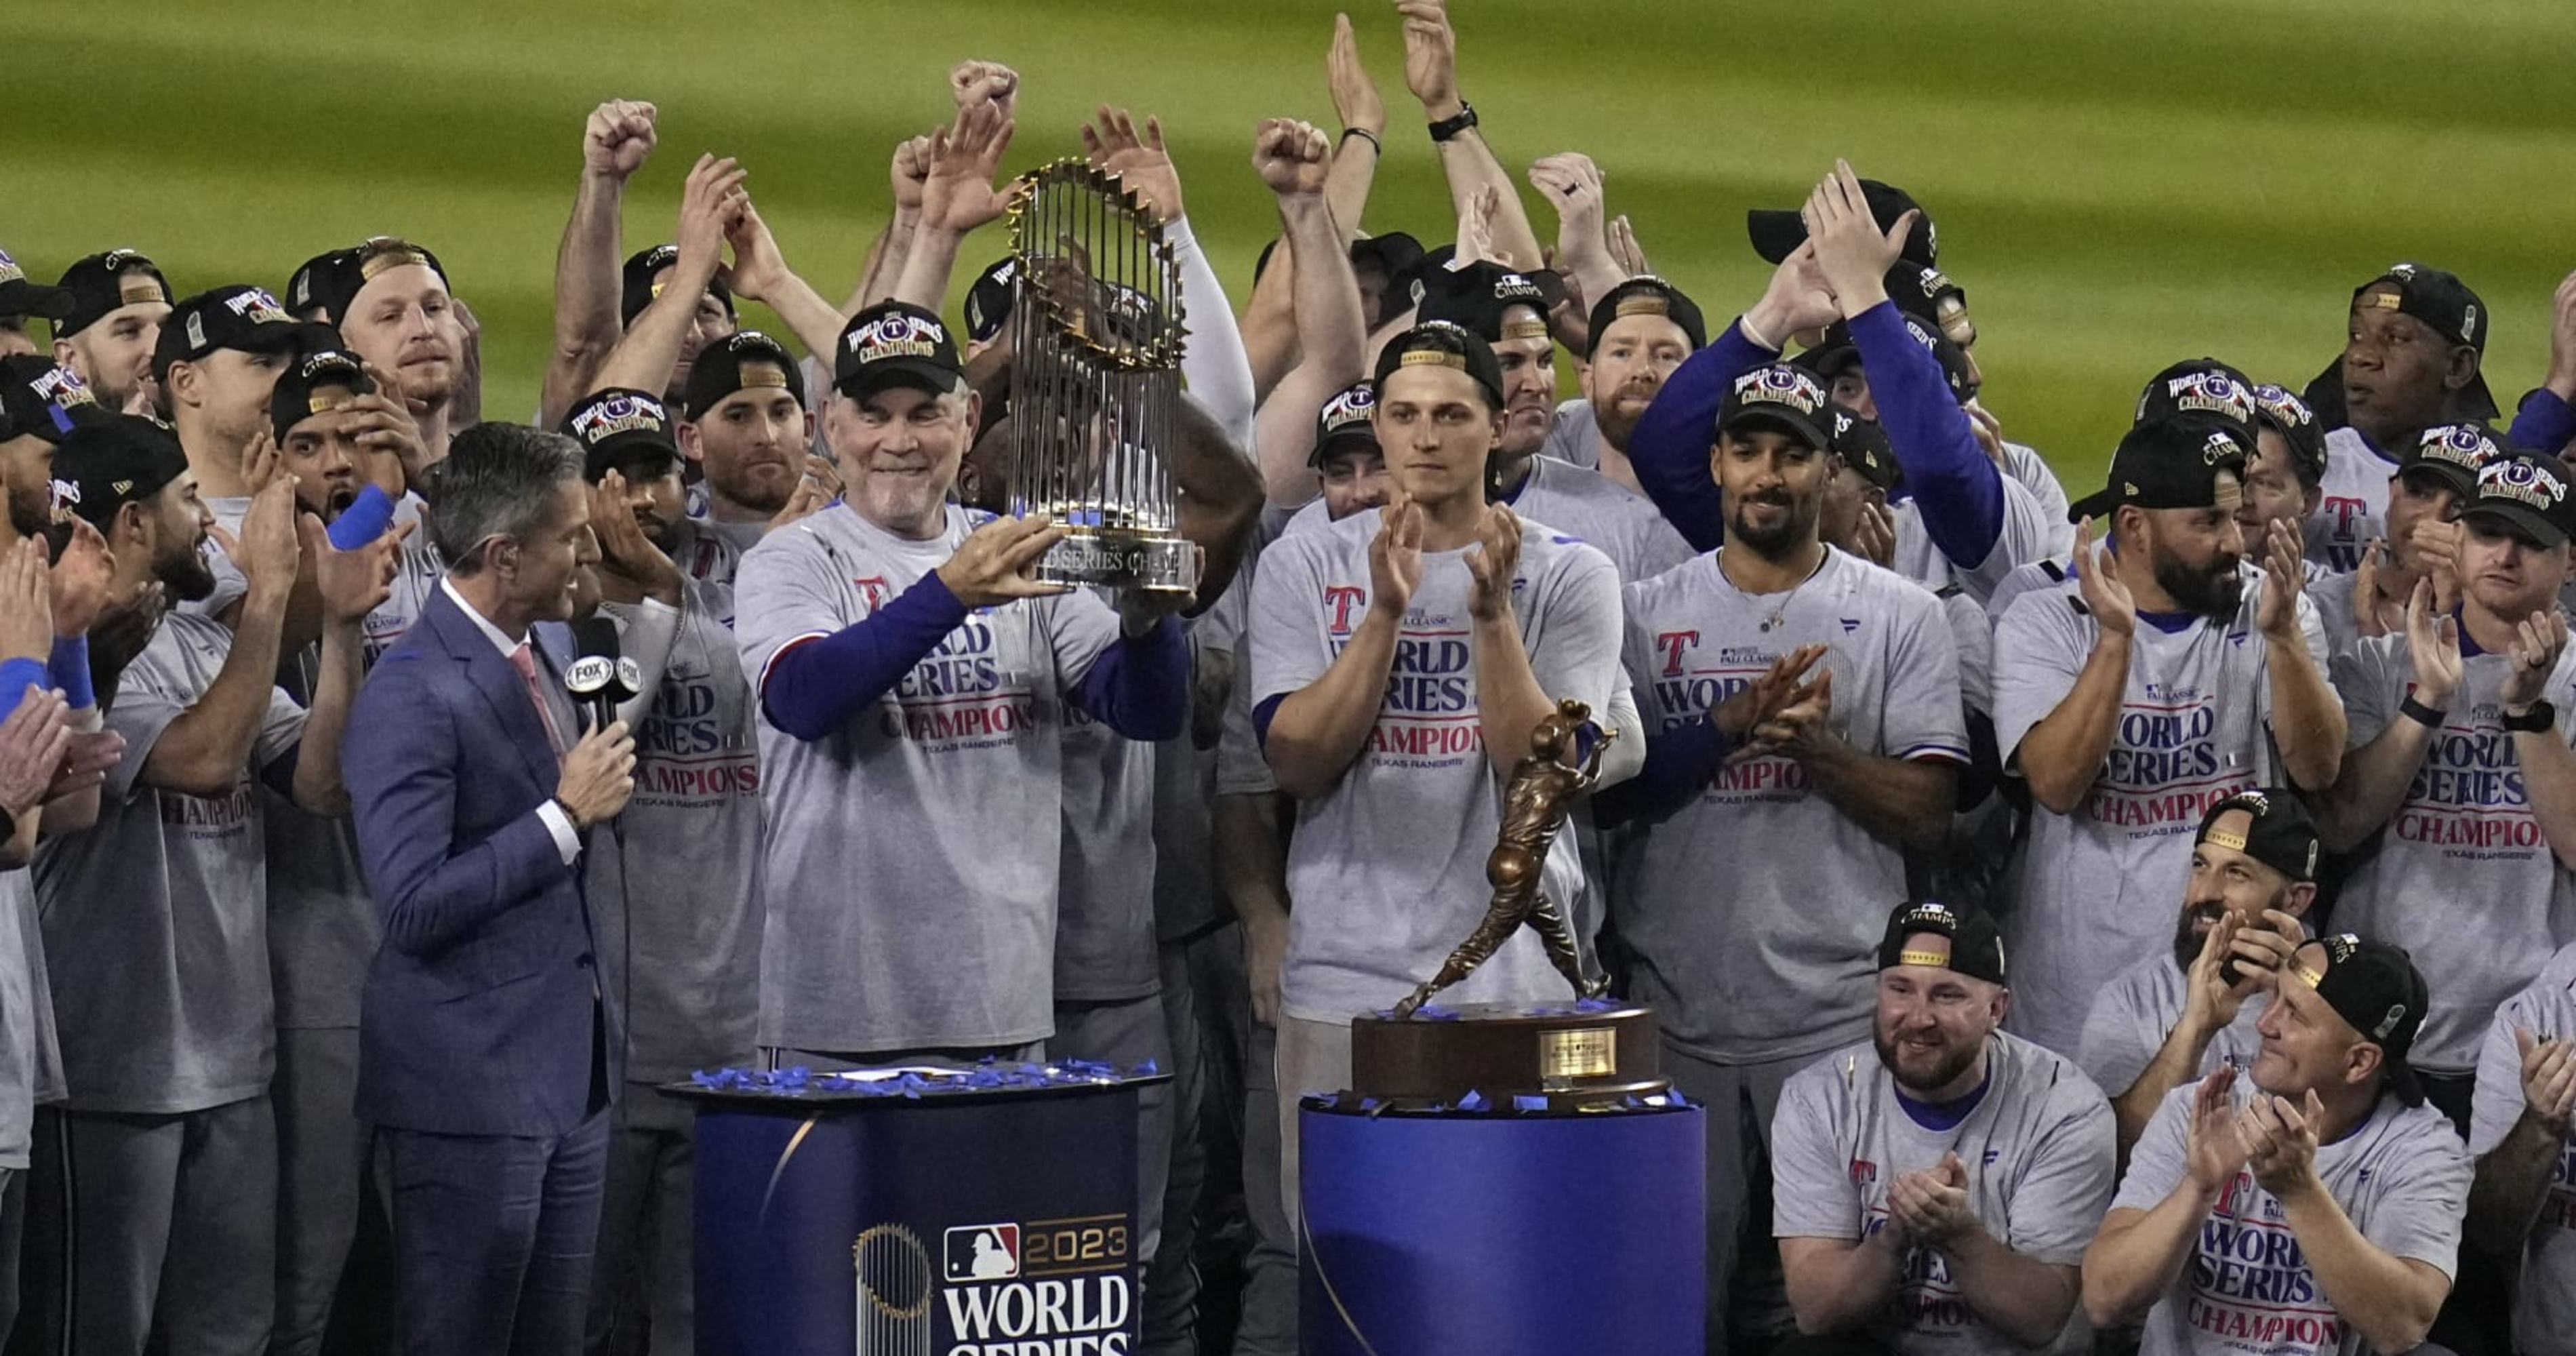 Video: Bruce Bochy Says Rangers 'Just Wrote History' During World Series Celebration